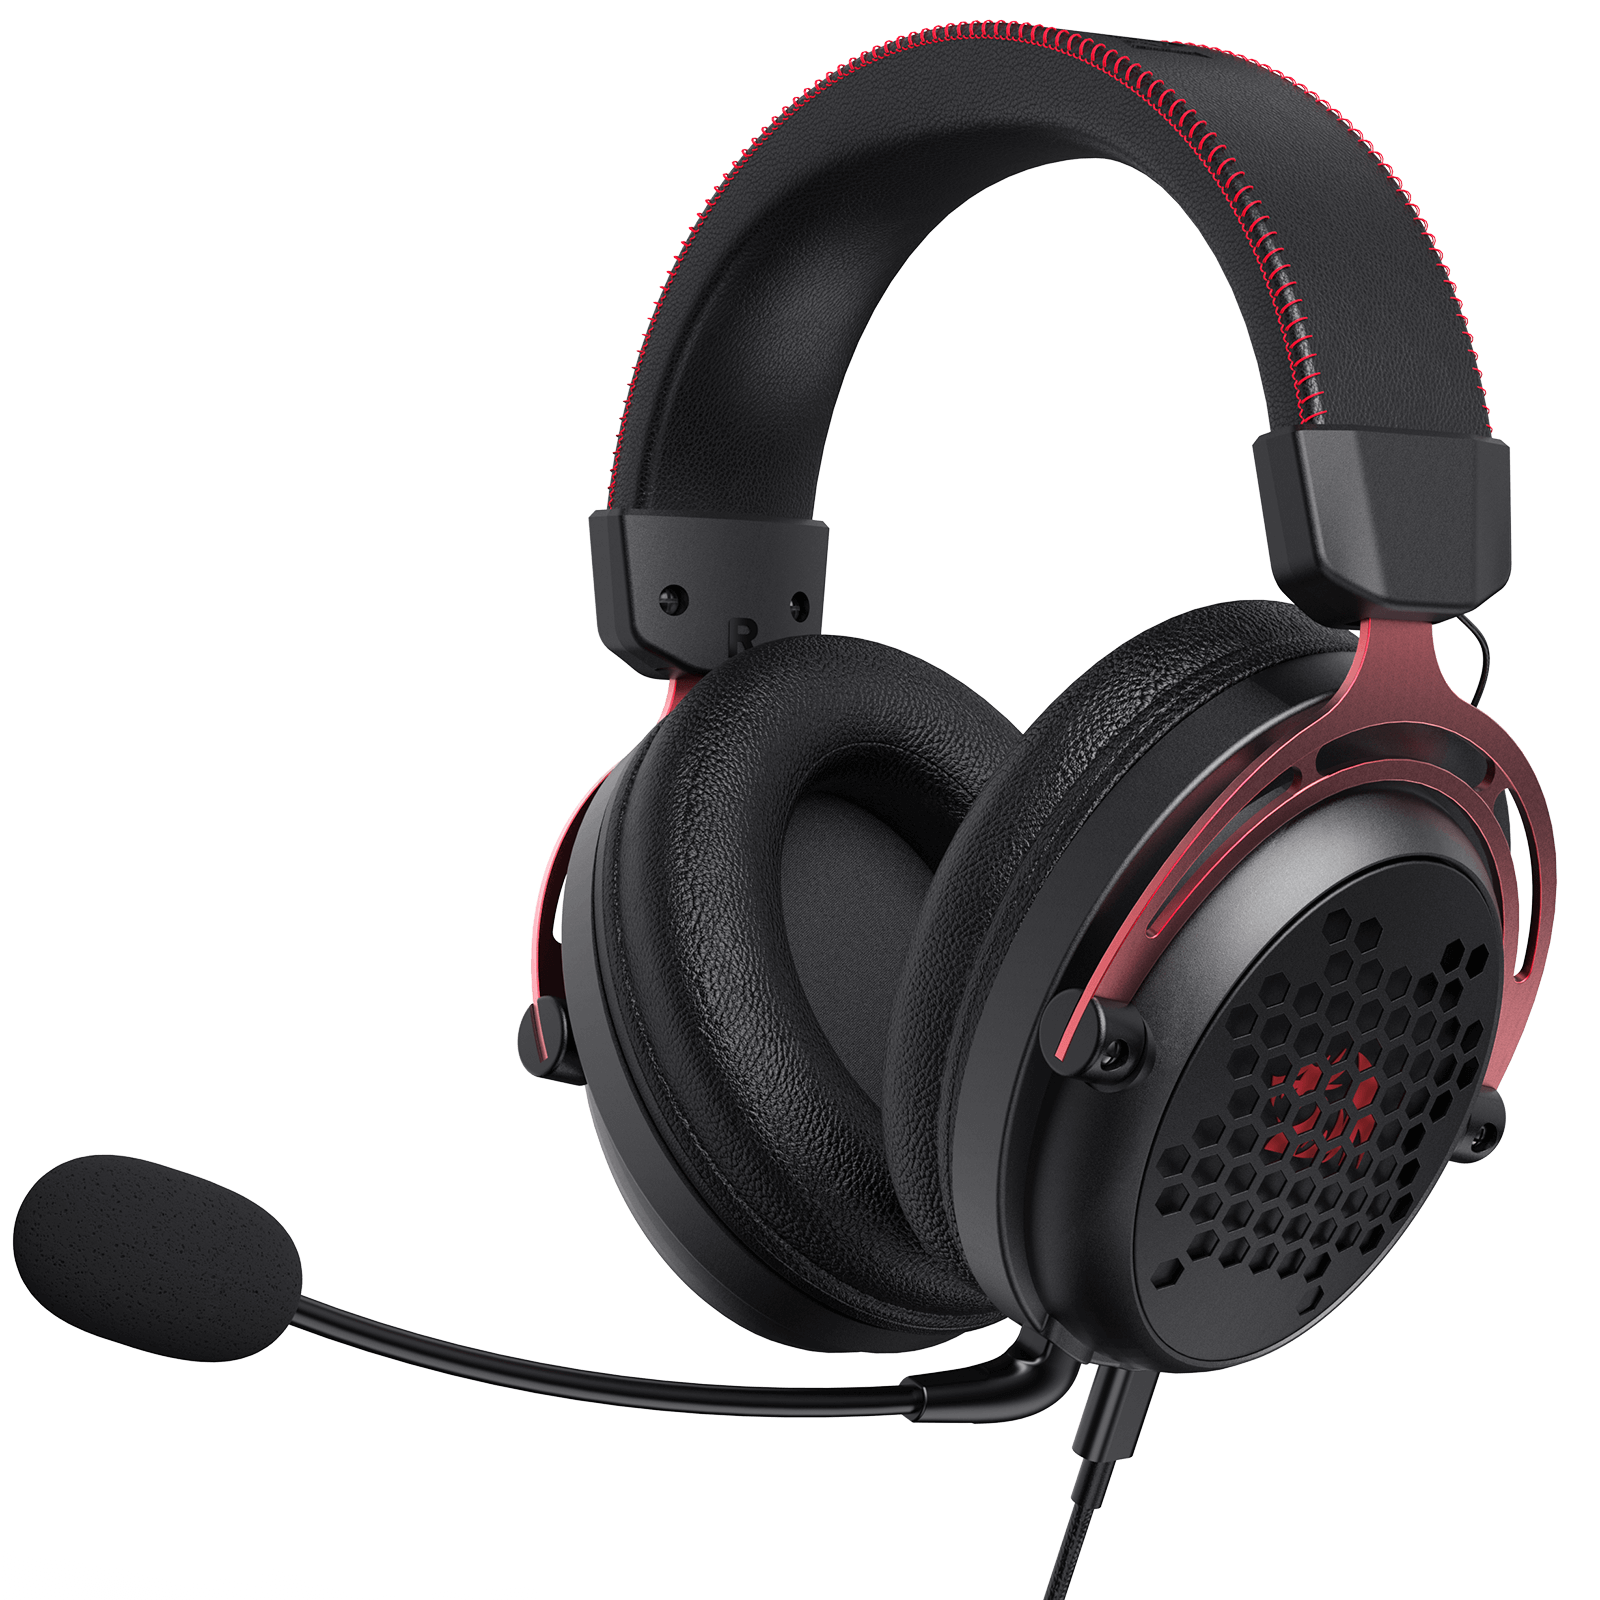 pc gaming headset with mic